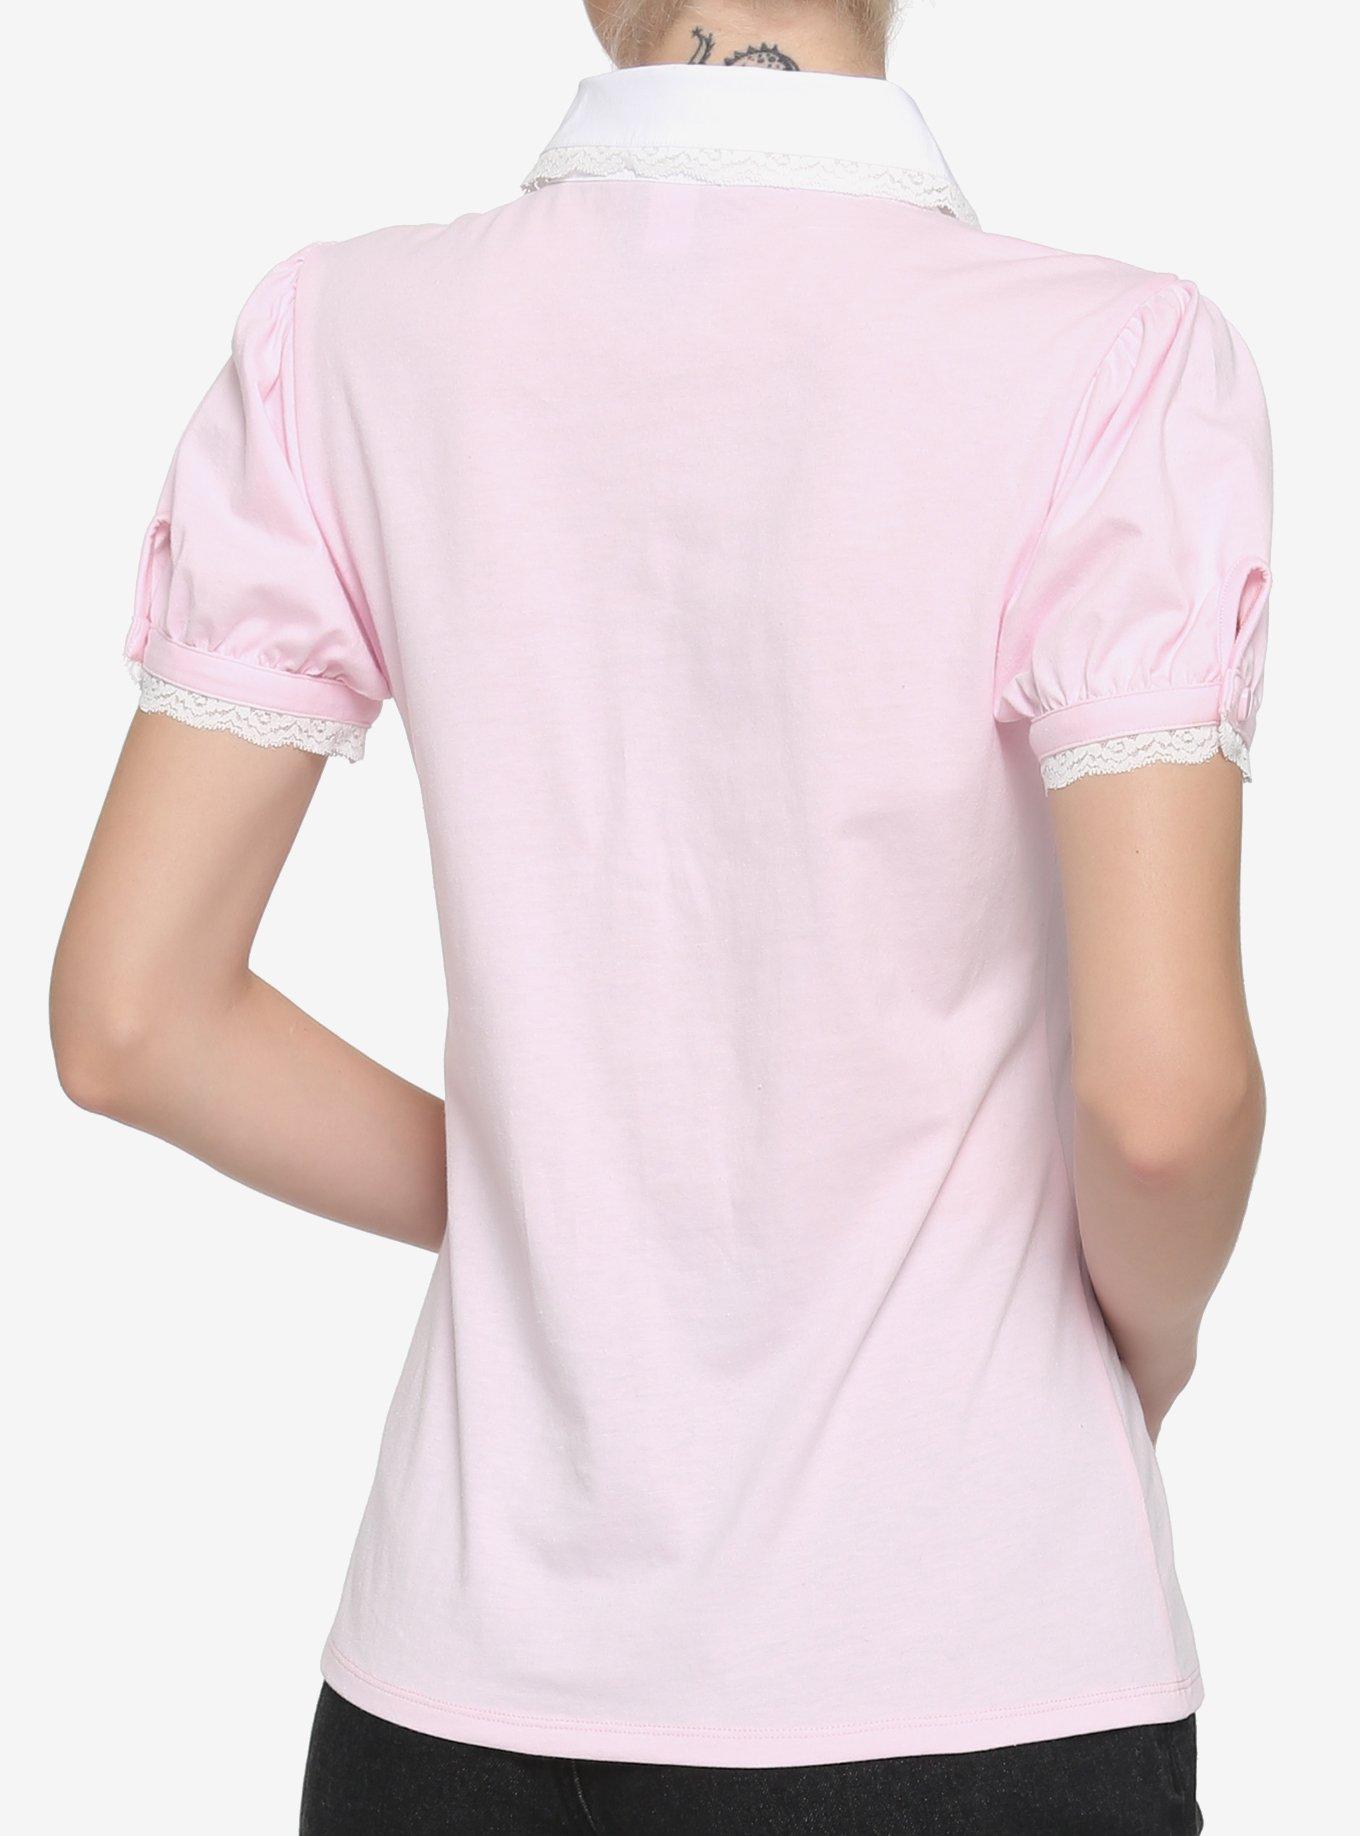 My Melody Pink Collared Girls Top, PINK, alternate